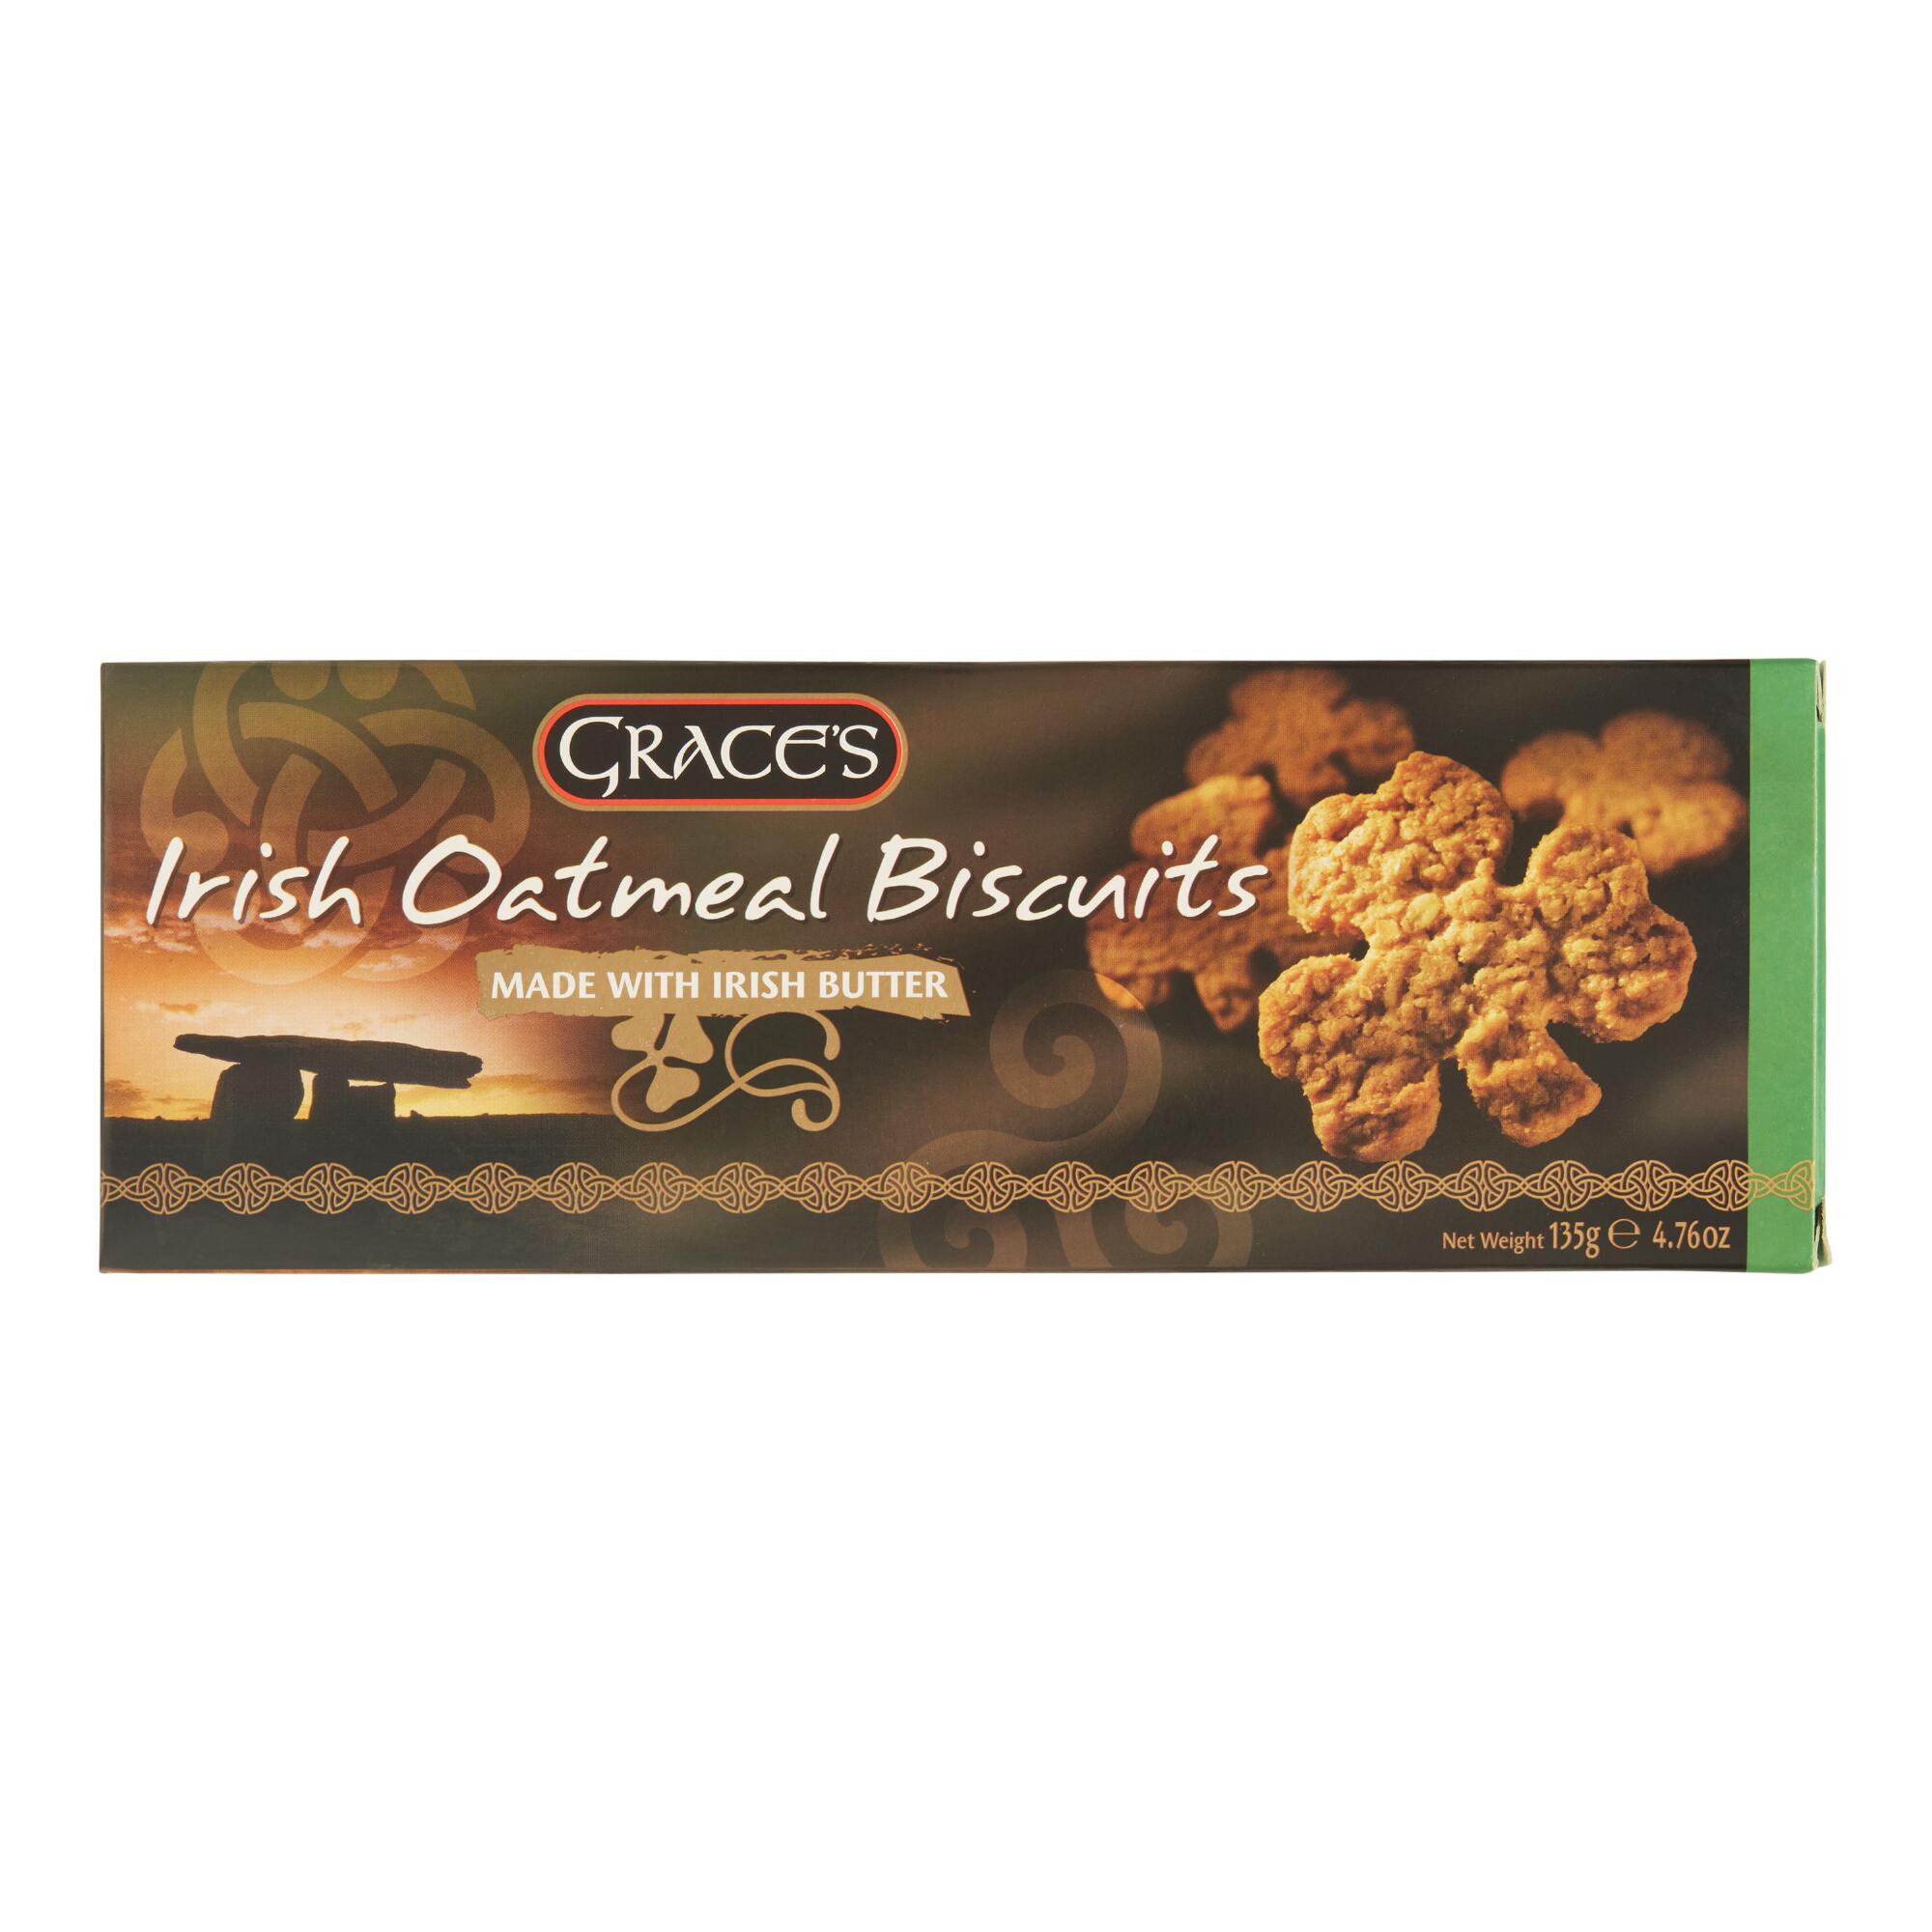 Grace's Irish Oatmeal Biscuits Set of 2 by World Market